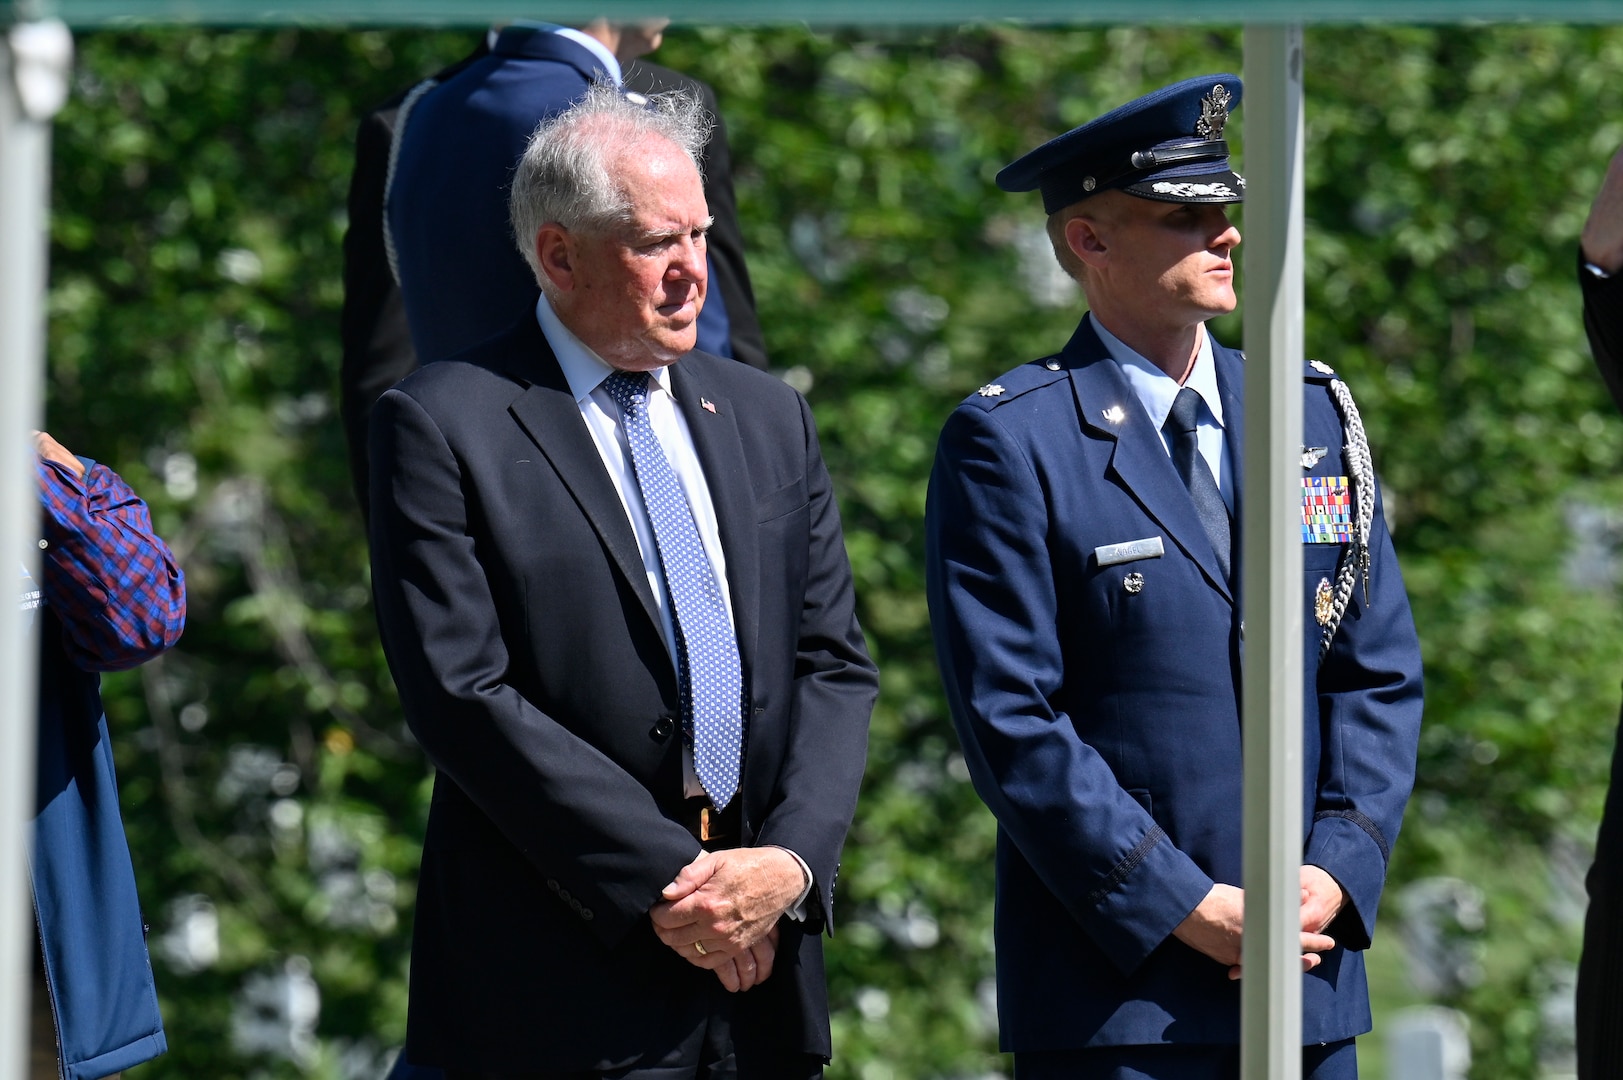 Secretary of the Air Force Frank Kendall attends the funeral of Brig. Gen. Charles E. McGee at Arlington National Cemetery, Arlington, Va., June 17, 2022. McGee, a Tuskegee Airman, died Jan. 16, 2022 at the age of 102. He served 30 years during World War II, the Korean War and the Vietnam War. (U.S. Air Force photo by Eric Dietrich)